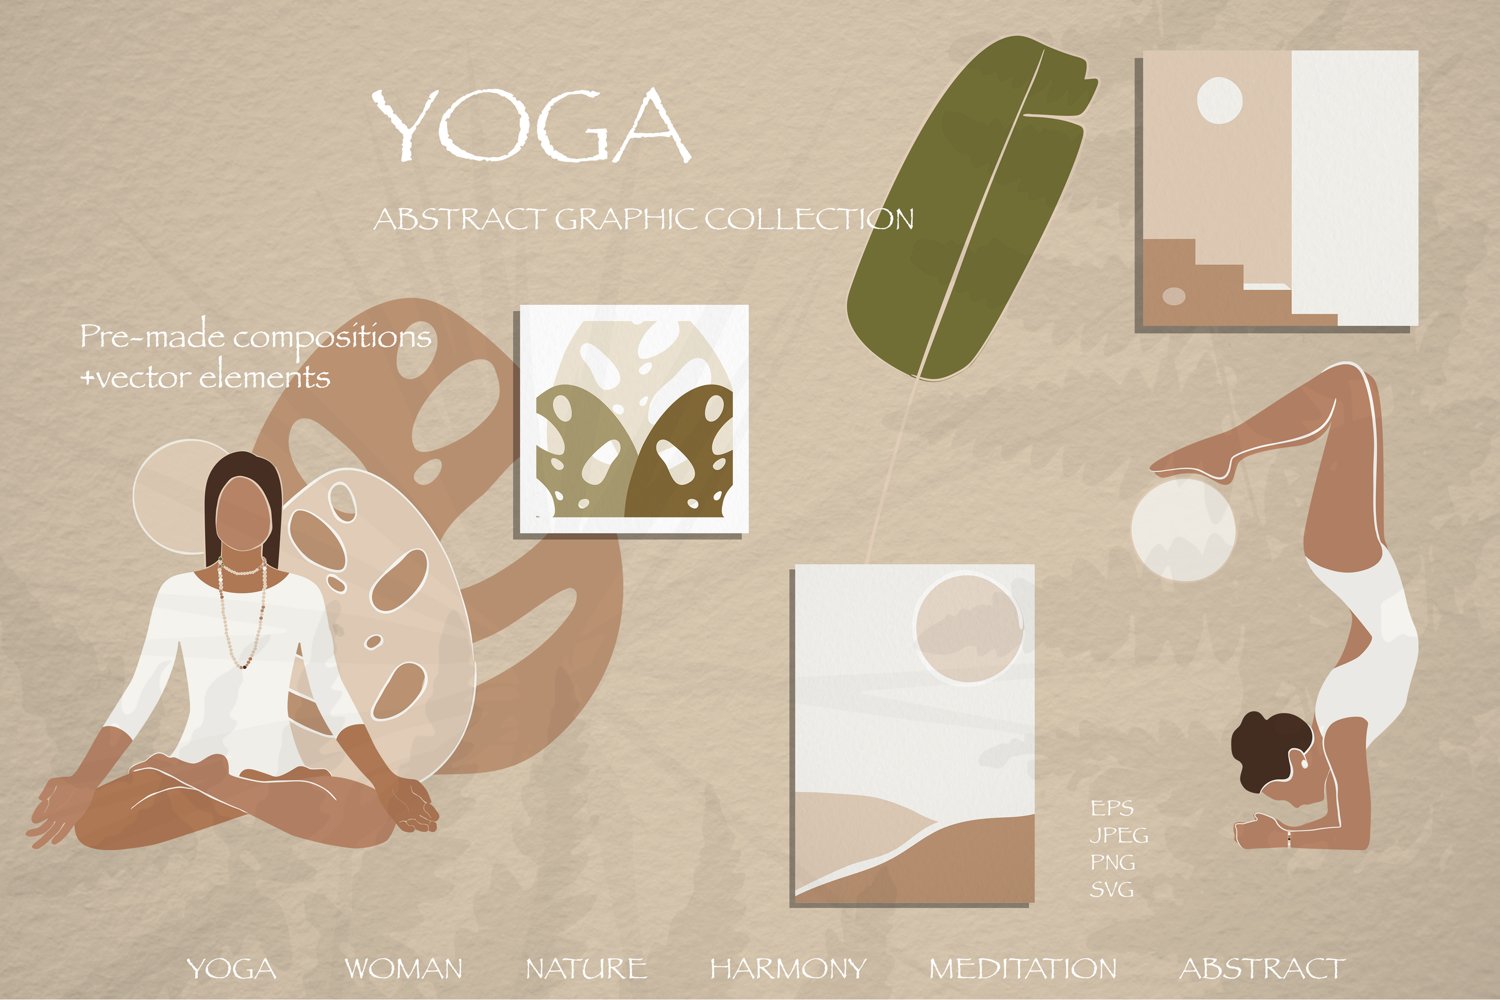 Cover image of Yoga abstract graphic collection.